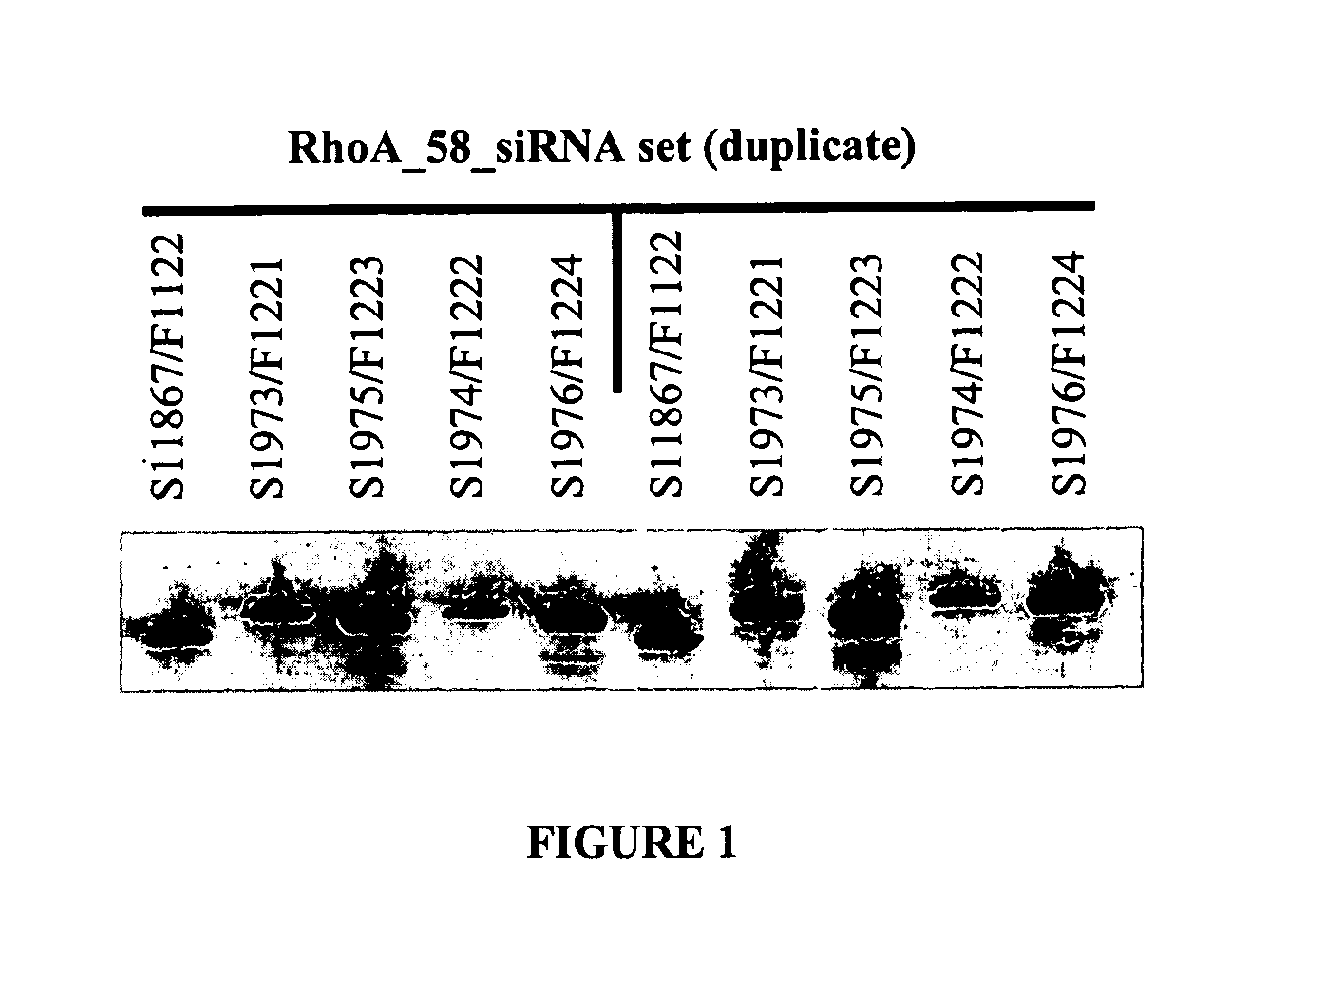 Double-stranded nucleic acid compounds